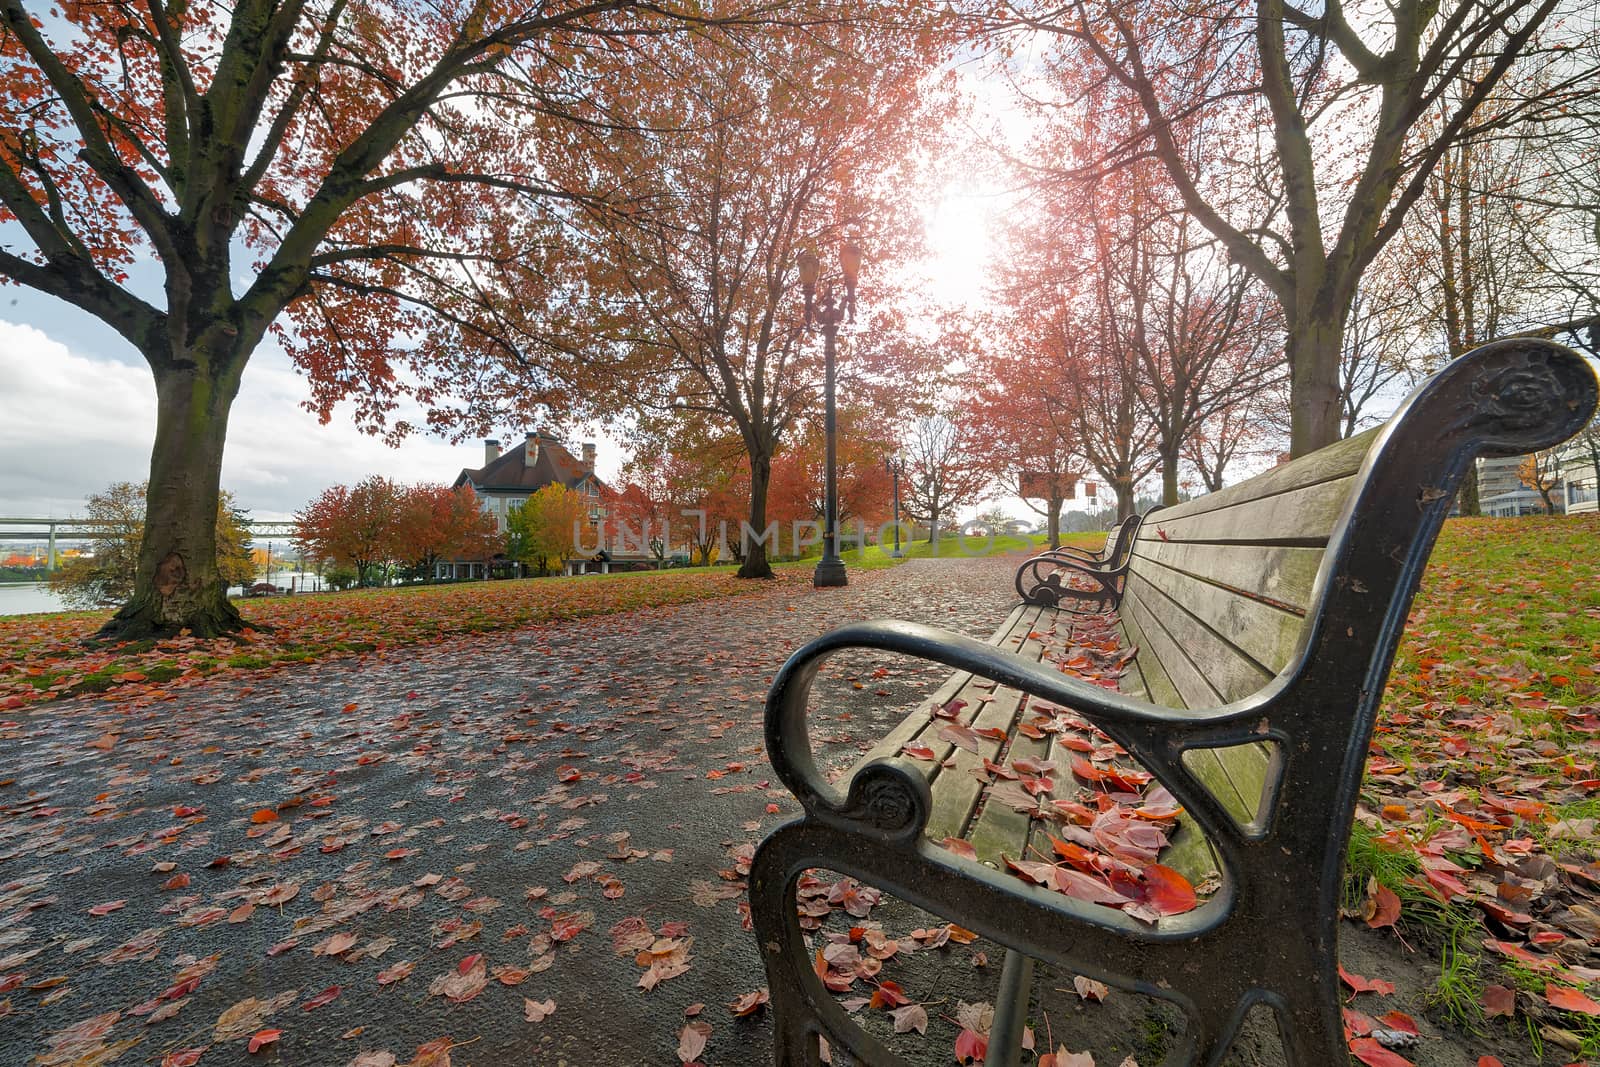 Park Benches in Waterfront Park in downtown Portland Oregon during fall season